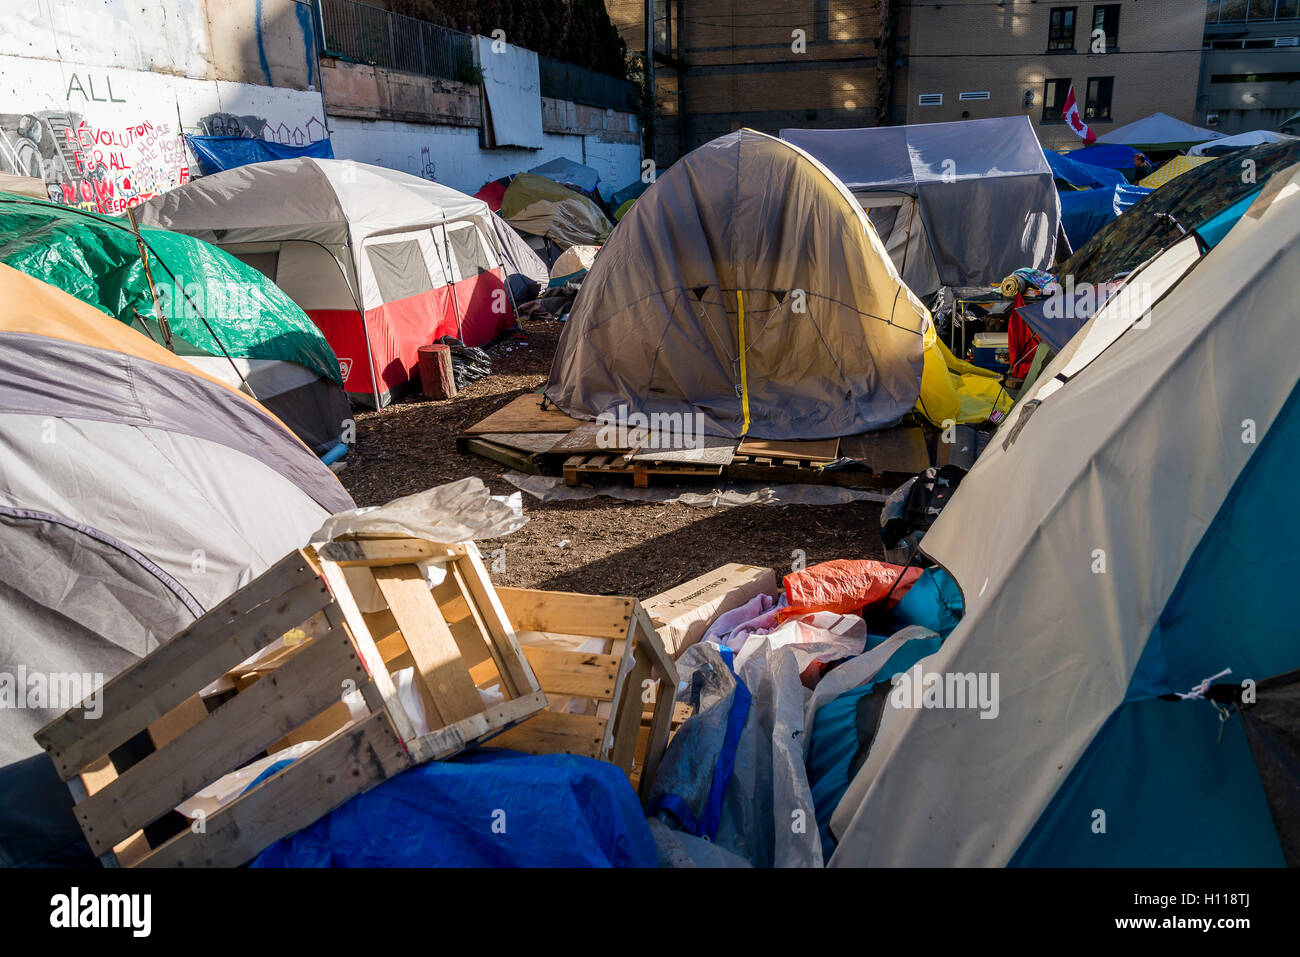 homelessness, downtown east side. DTES Hastings Street Tent City, Vancouver, British Columbia, Canada, Stock Photo